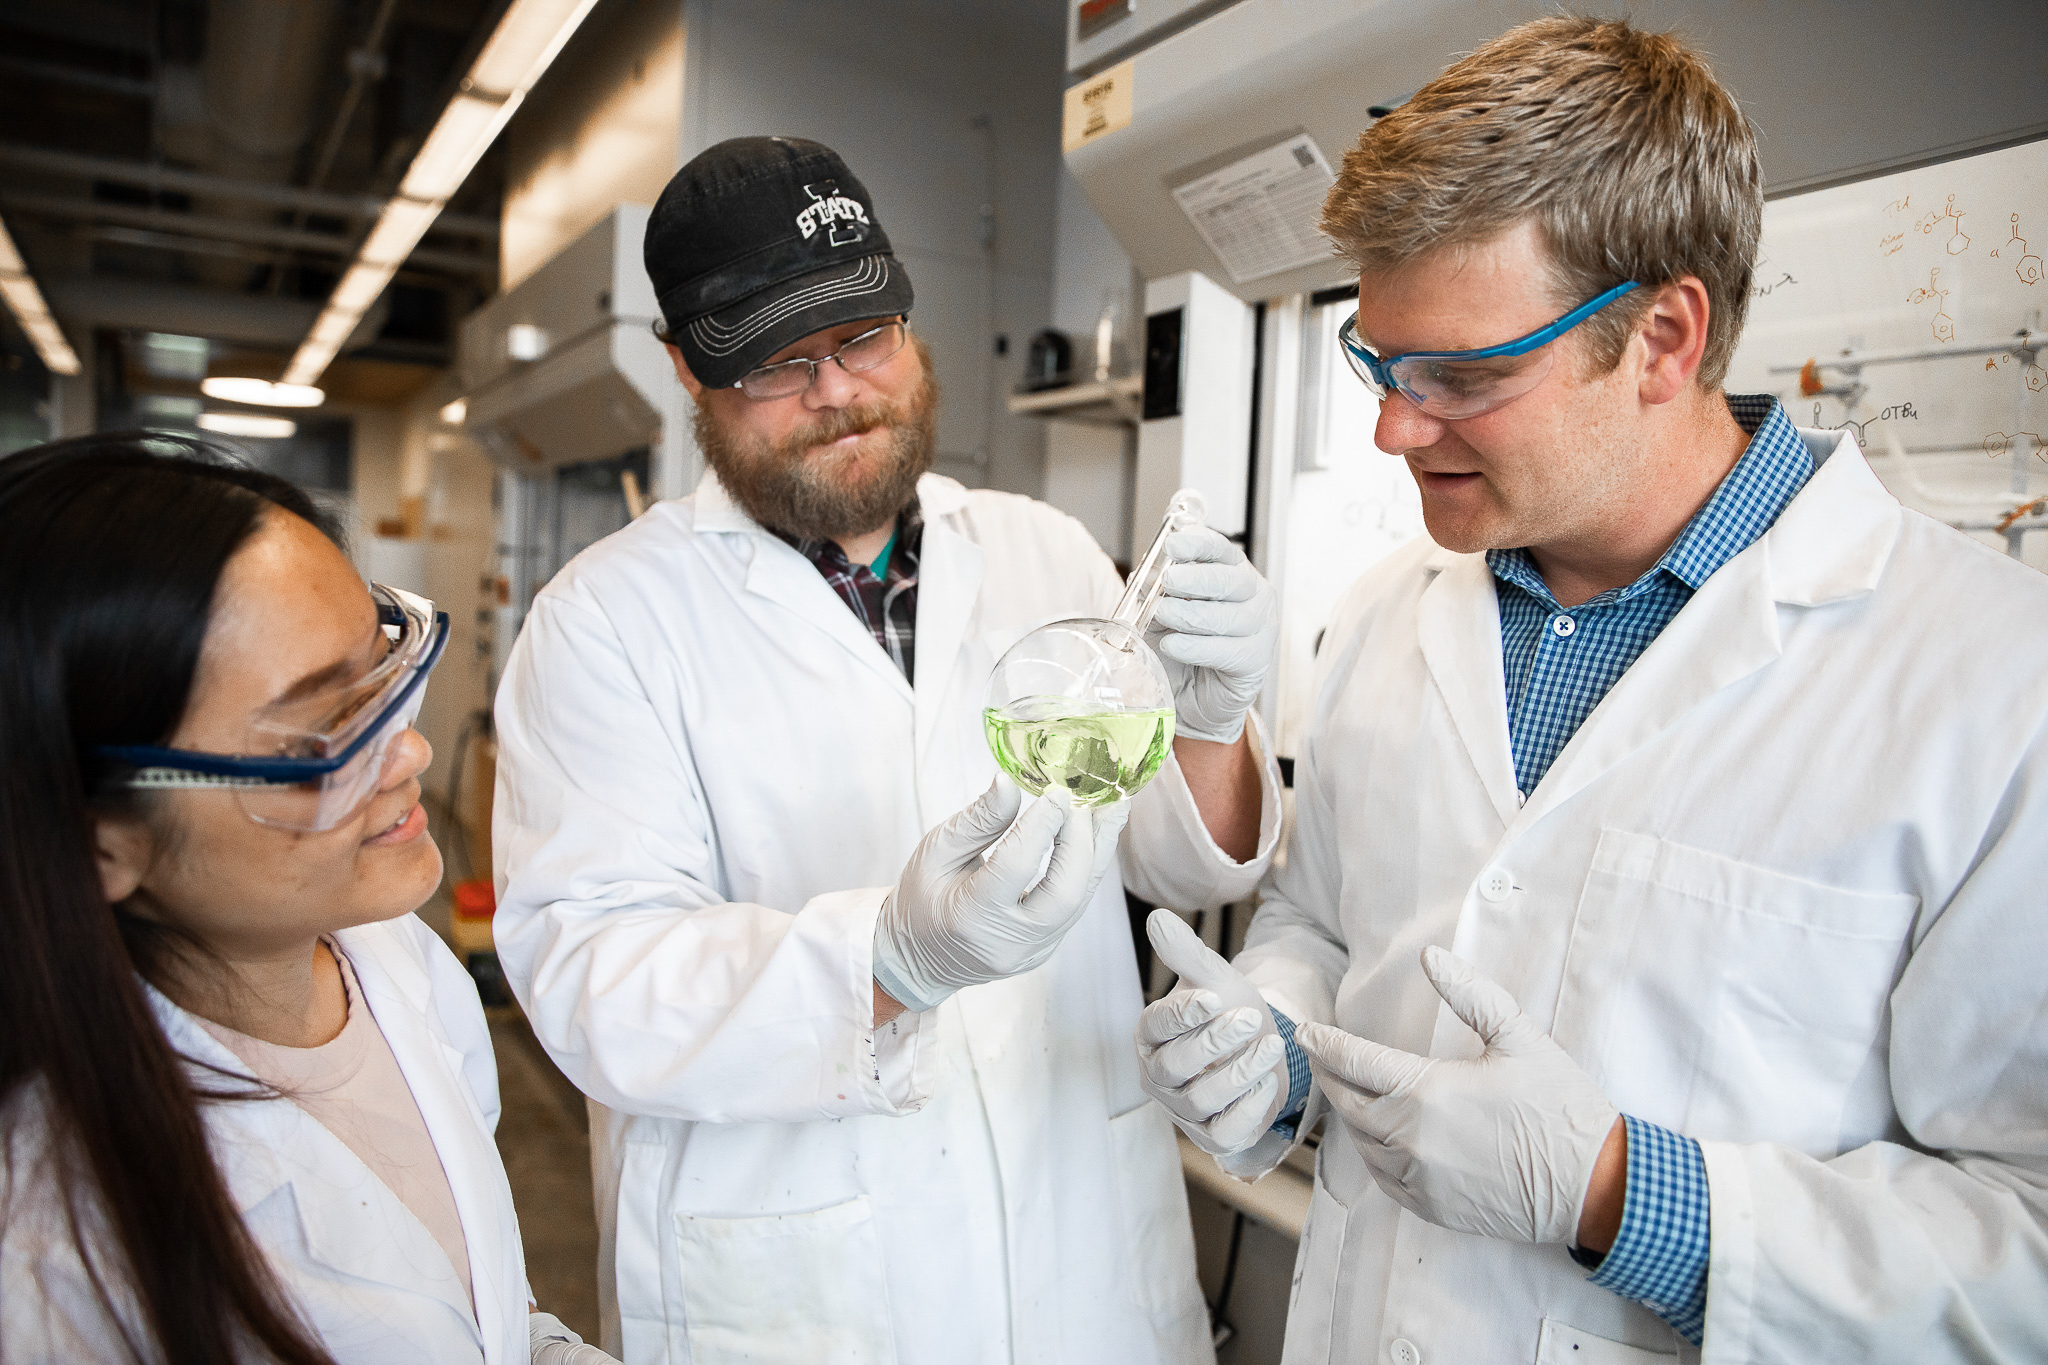 Dr. VanVeller and two students examine a flask